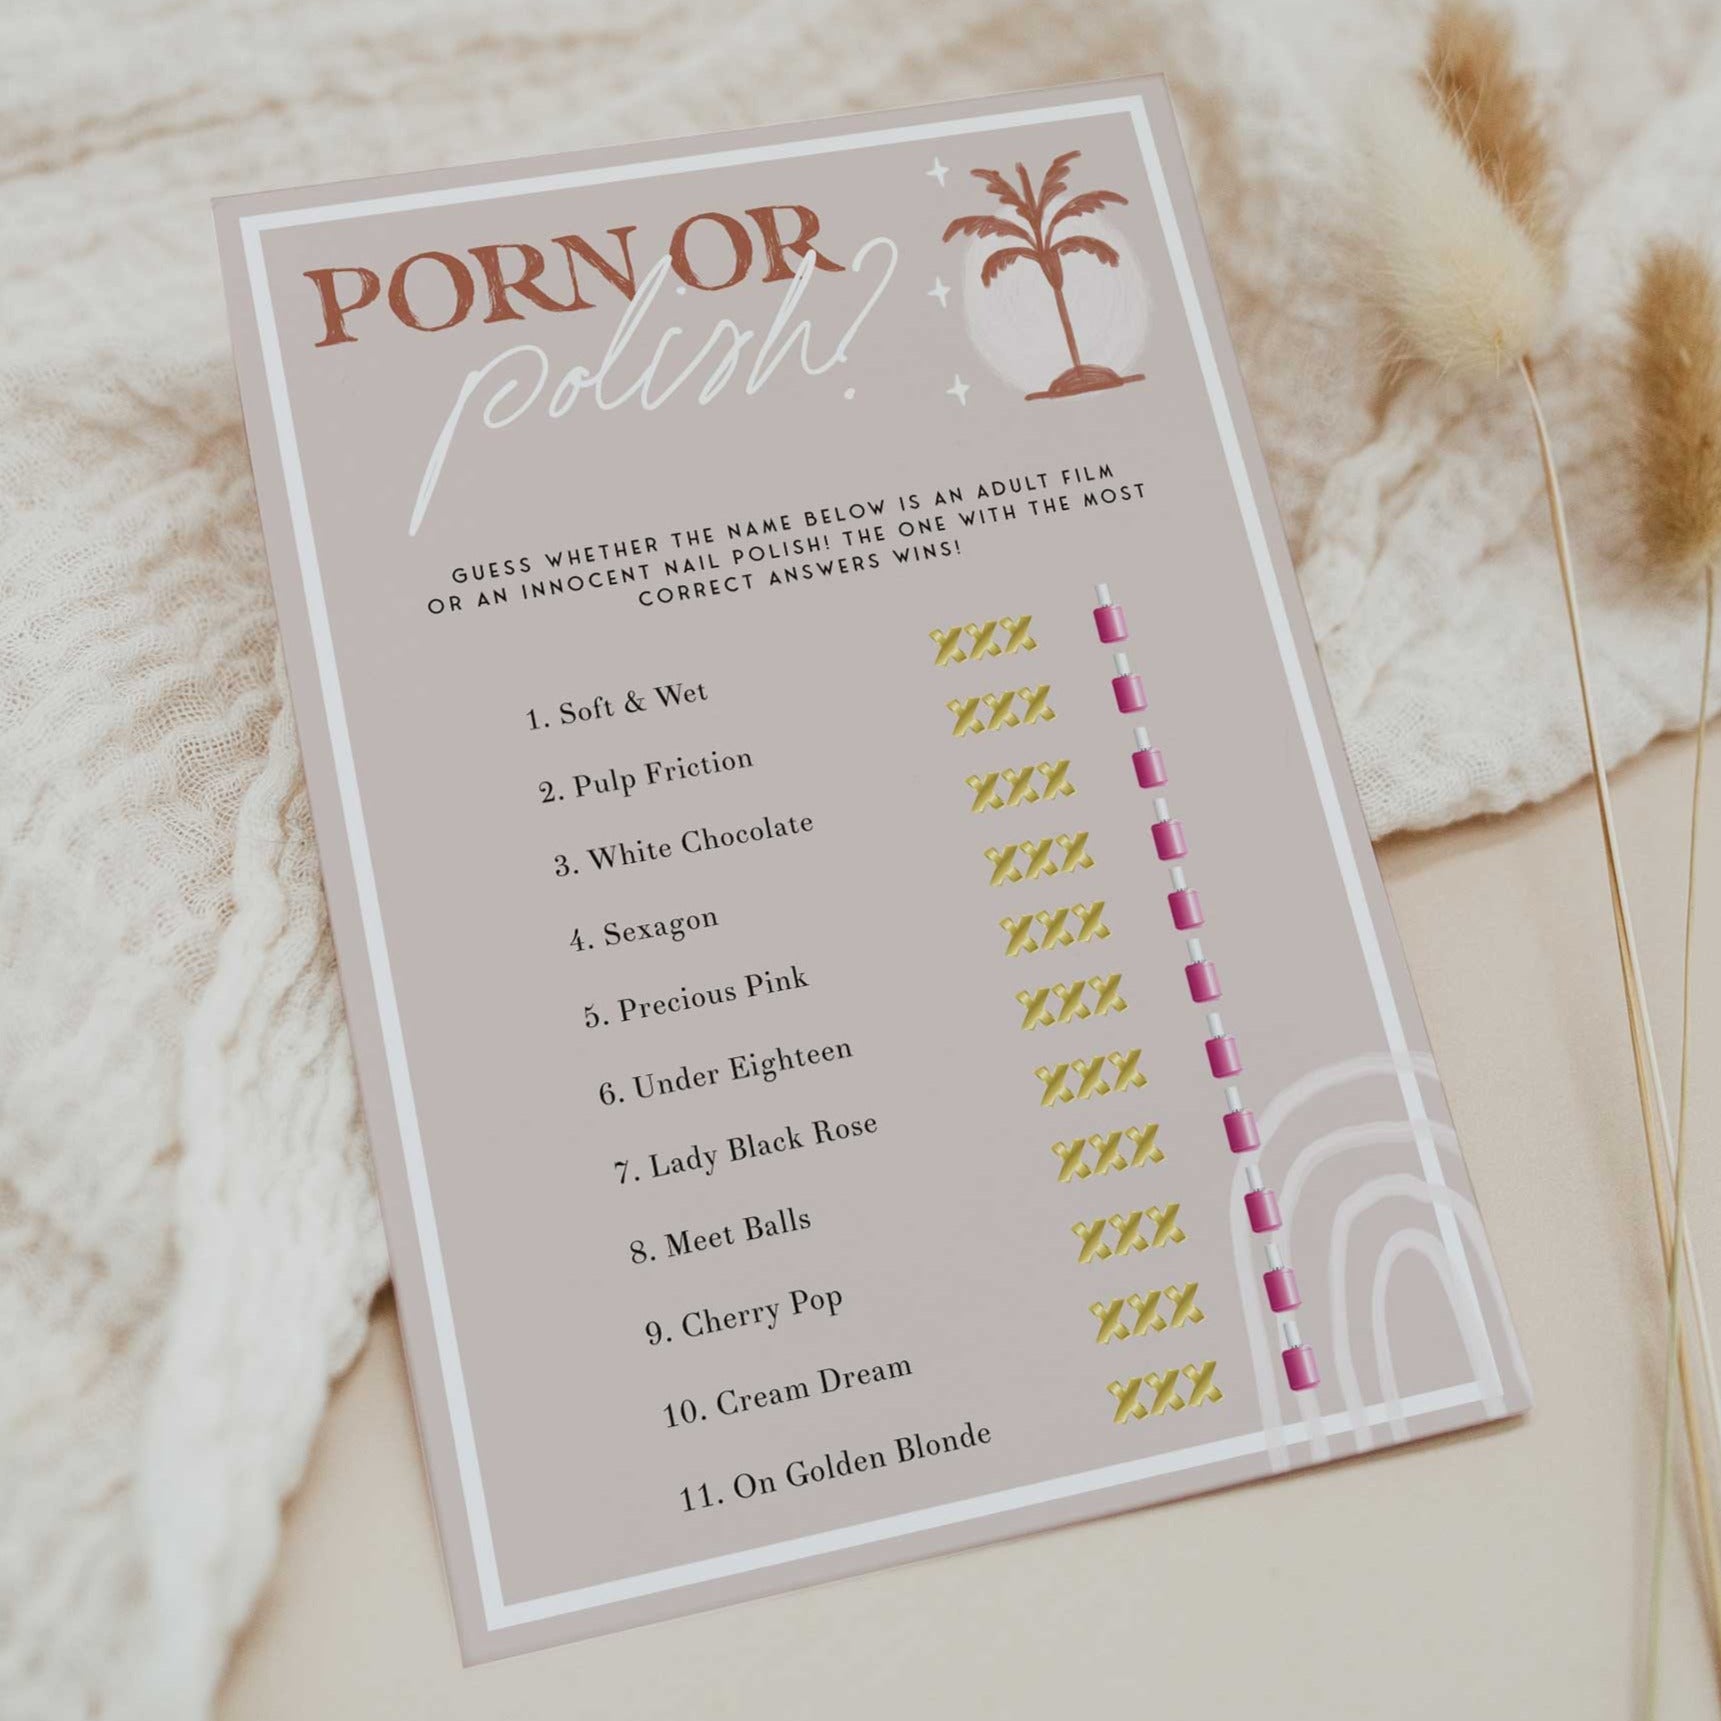 Fully editable and printable bridal shower porn or polish game with a Palm Springs design. Perfect for a Palm Springs bridal shower themed party